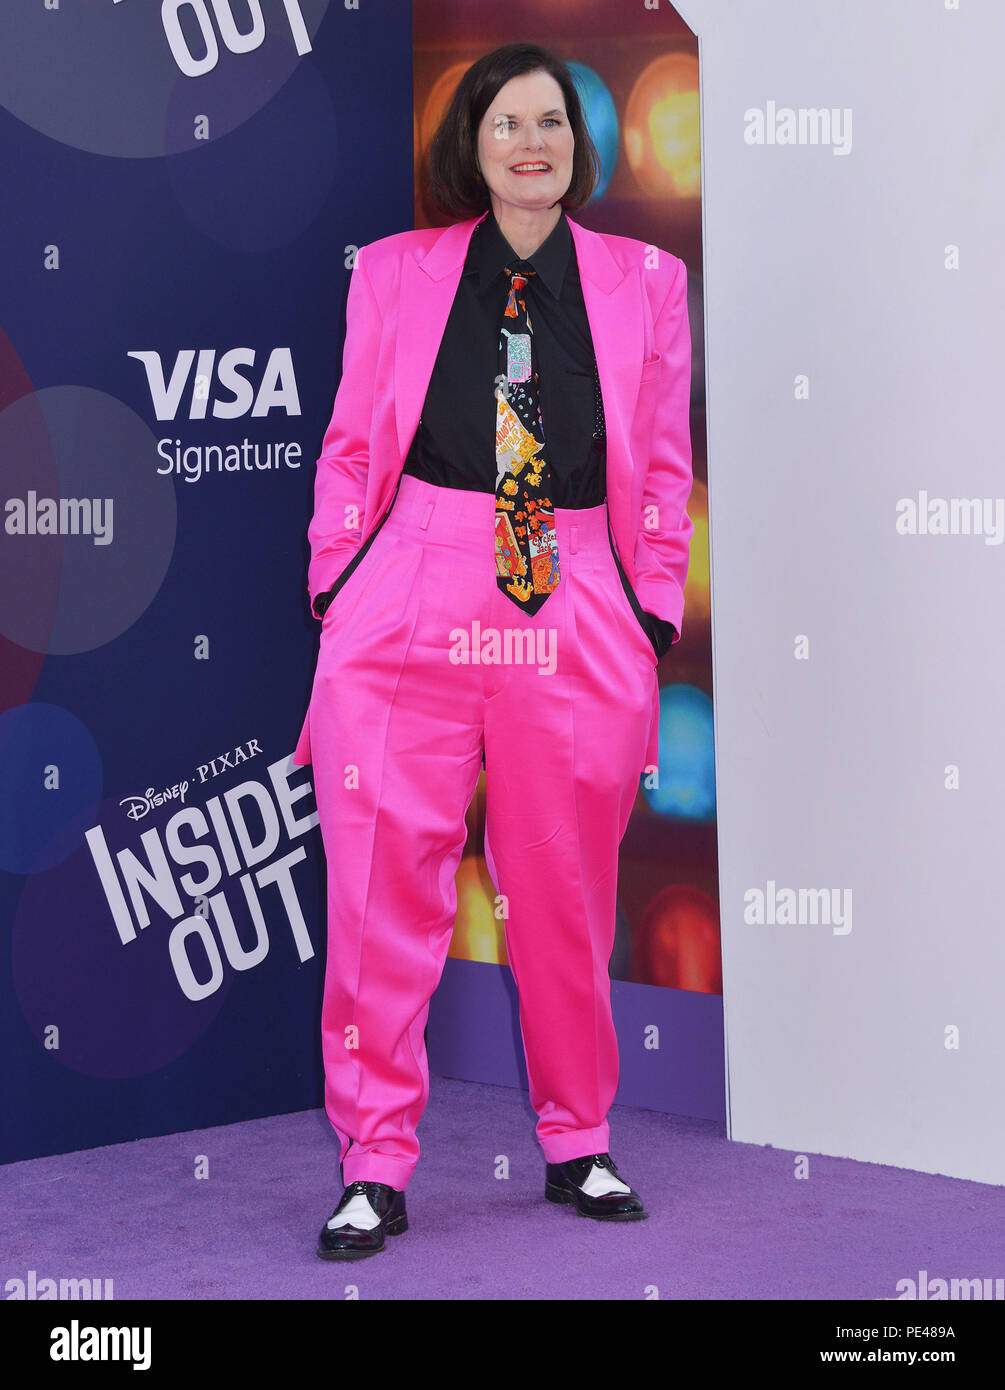 paula poundstone 105 at the  Inside Out Premiere at the El Capitan Theatre in Los Angeles. June, 8, 2015.paula poundstone 105  Event in Hollywood Life - California, Red Carpet Event, USA, Film Industry, Celebrities, Photography, Bestof, Arts Culture and Entertainment, Topix Celebrities fashion, Best of, Hollywood Life, Event in Hollywood Life - California, Red Carpet and backstage, movie celebrities, TV celebrities, Music celebrities, Topix, Bestof, Arts Culture and Entertainment, vertical, one person, Photography,   Fashion, full length, 2015 inquiry tsuni@Gamma-USA.com , Credit Tsuni / USA, Stock Photo